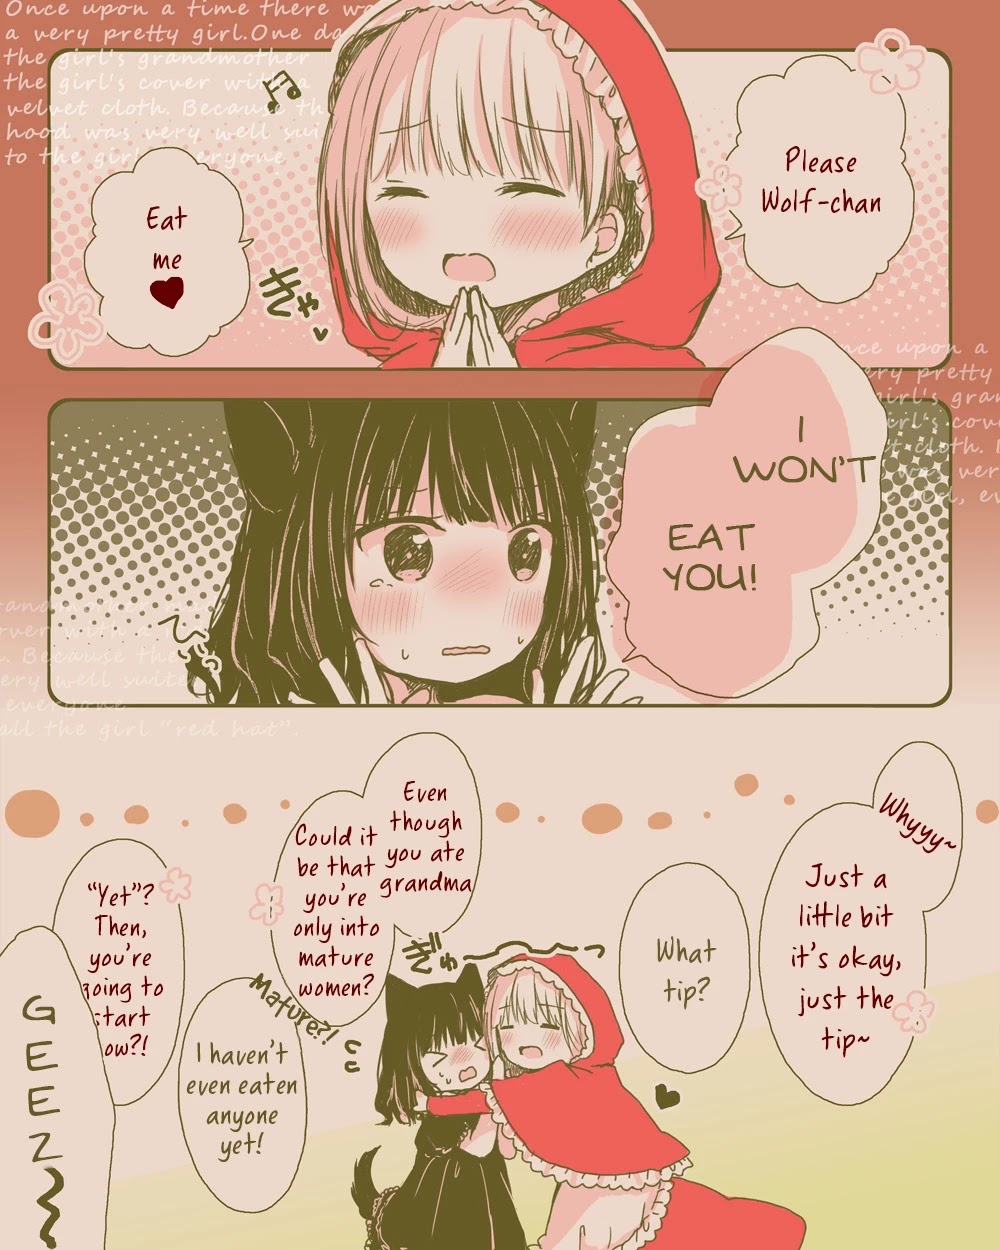 Daring Little Red Riding Hood And Herbivorous Wolf-Chan - Page 1